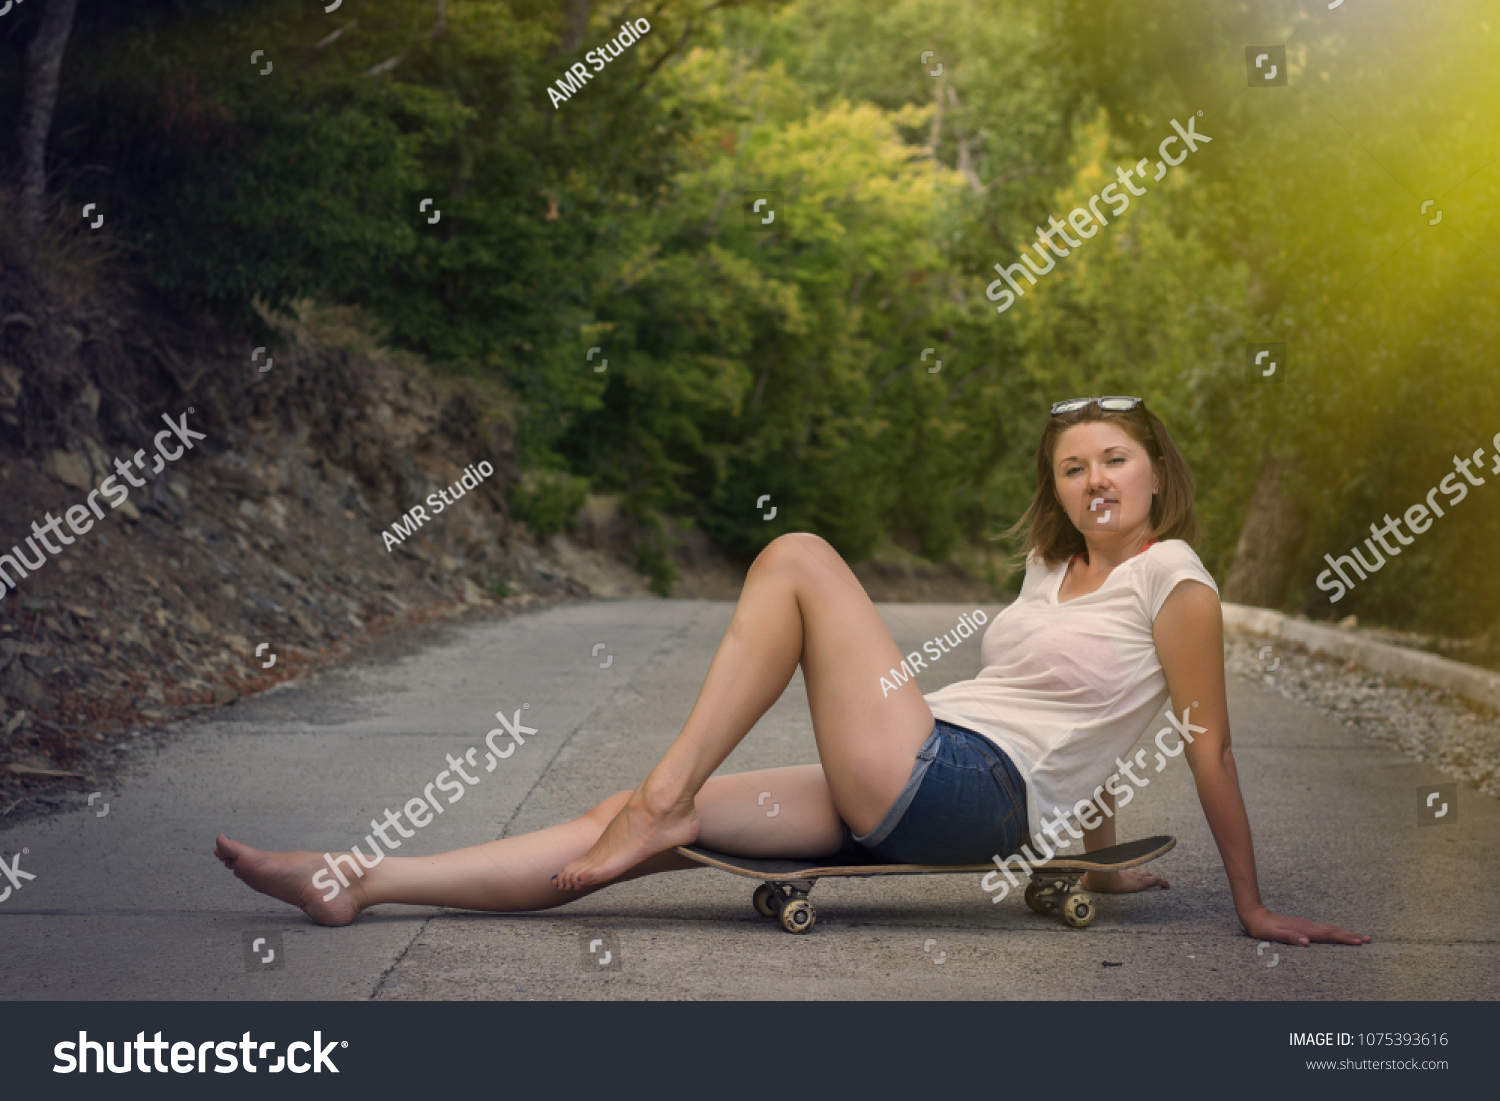 https://image.shutterstock.com/shutterstock/photos/1075393616/display_1500/stock-photo-young-woman-sits-on-a-skateboard-on-concrete-road-barefoot-relaxed-female-in-jeans-shorts-and-1075393616.jpg